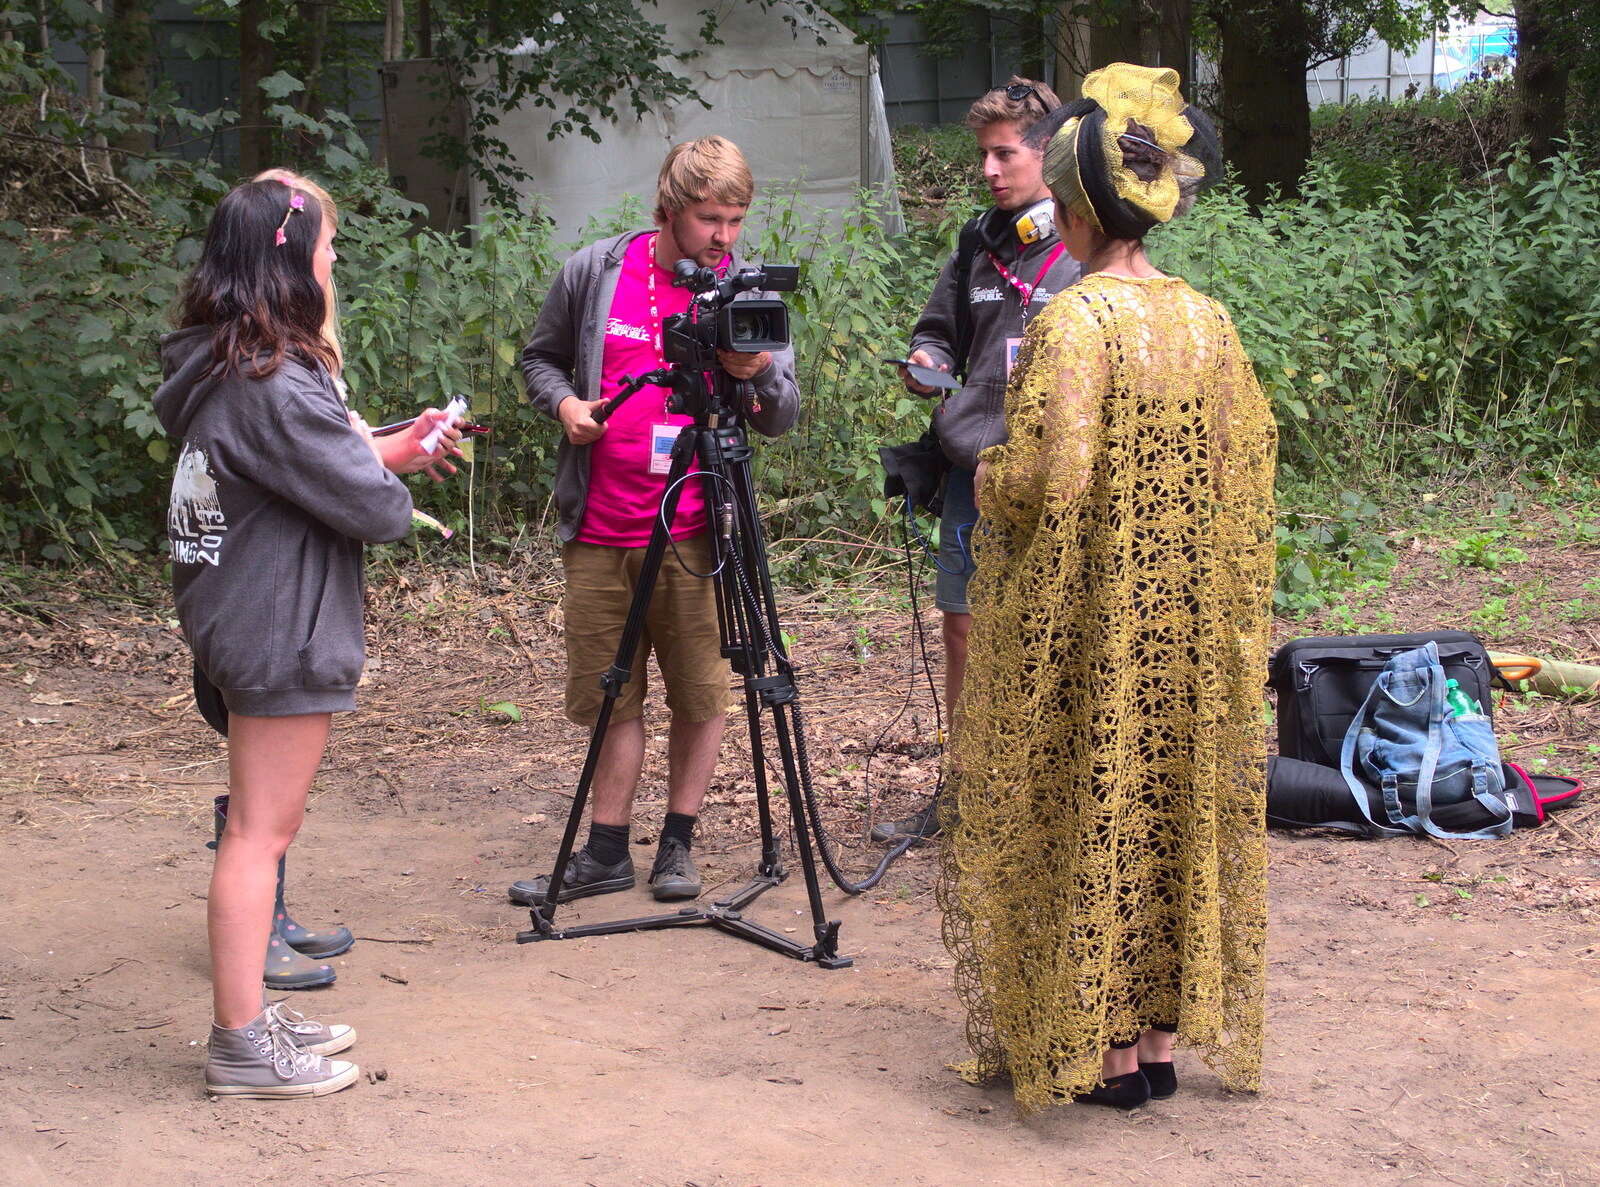 Daisy gets interviewed from The 8th Latitude Festival, Henham Park, Southwold, Suffolk - 18th July 2013